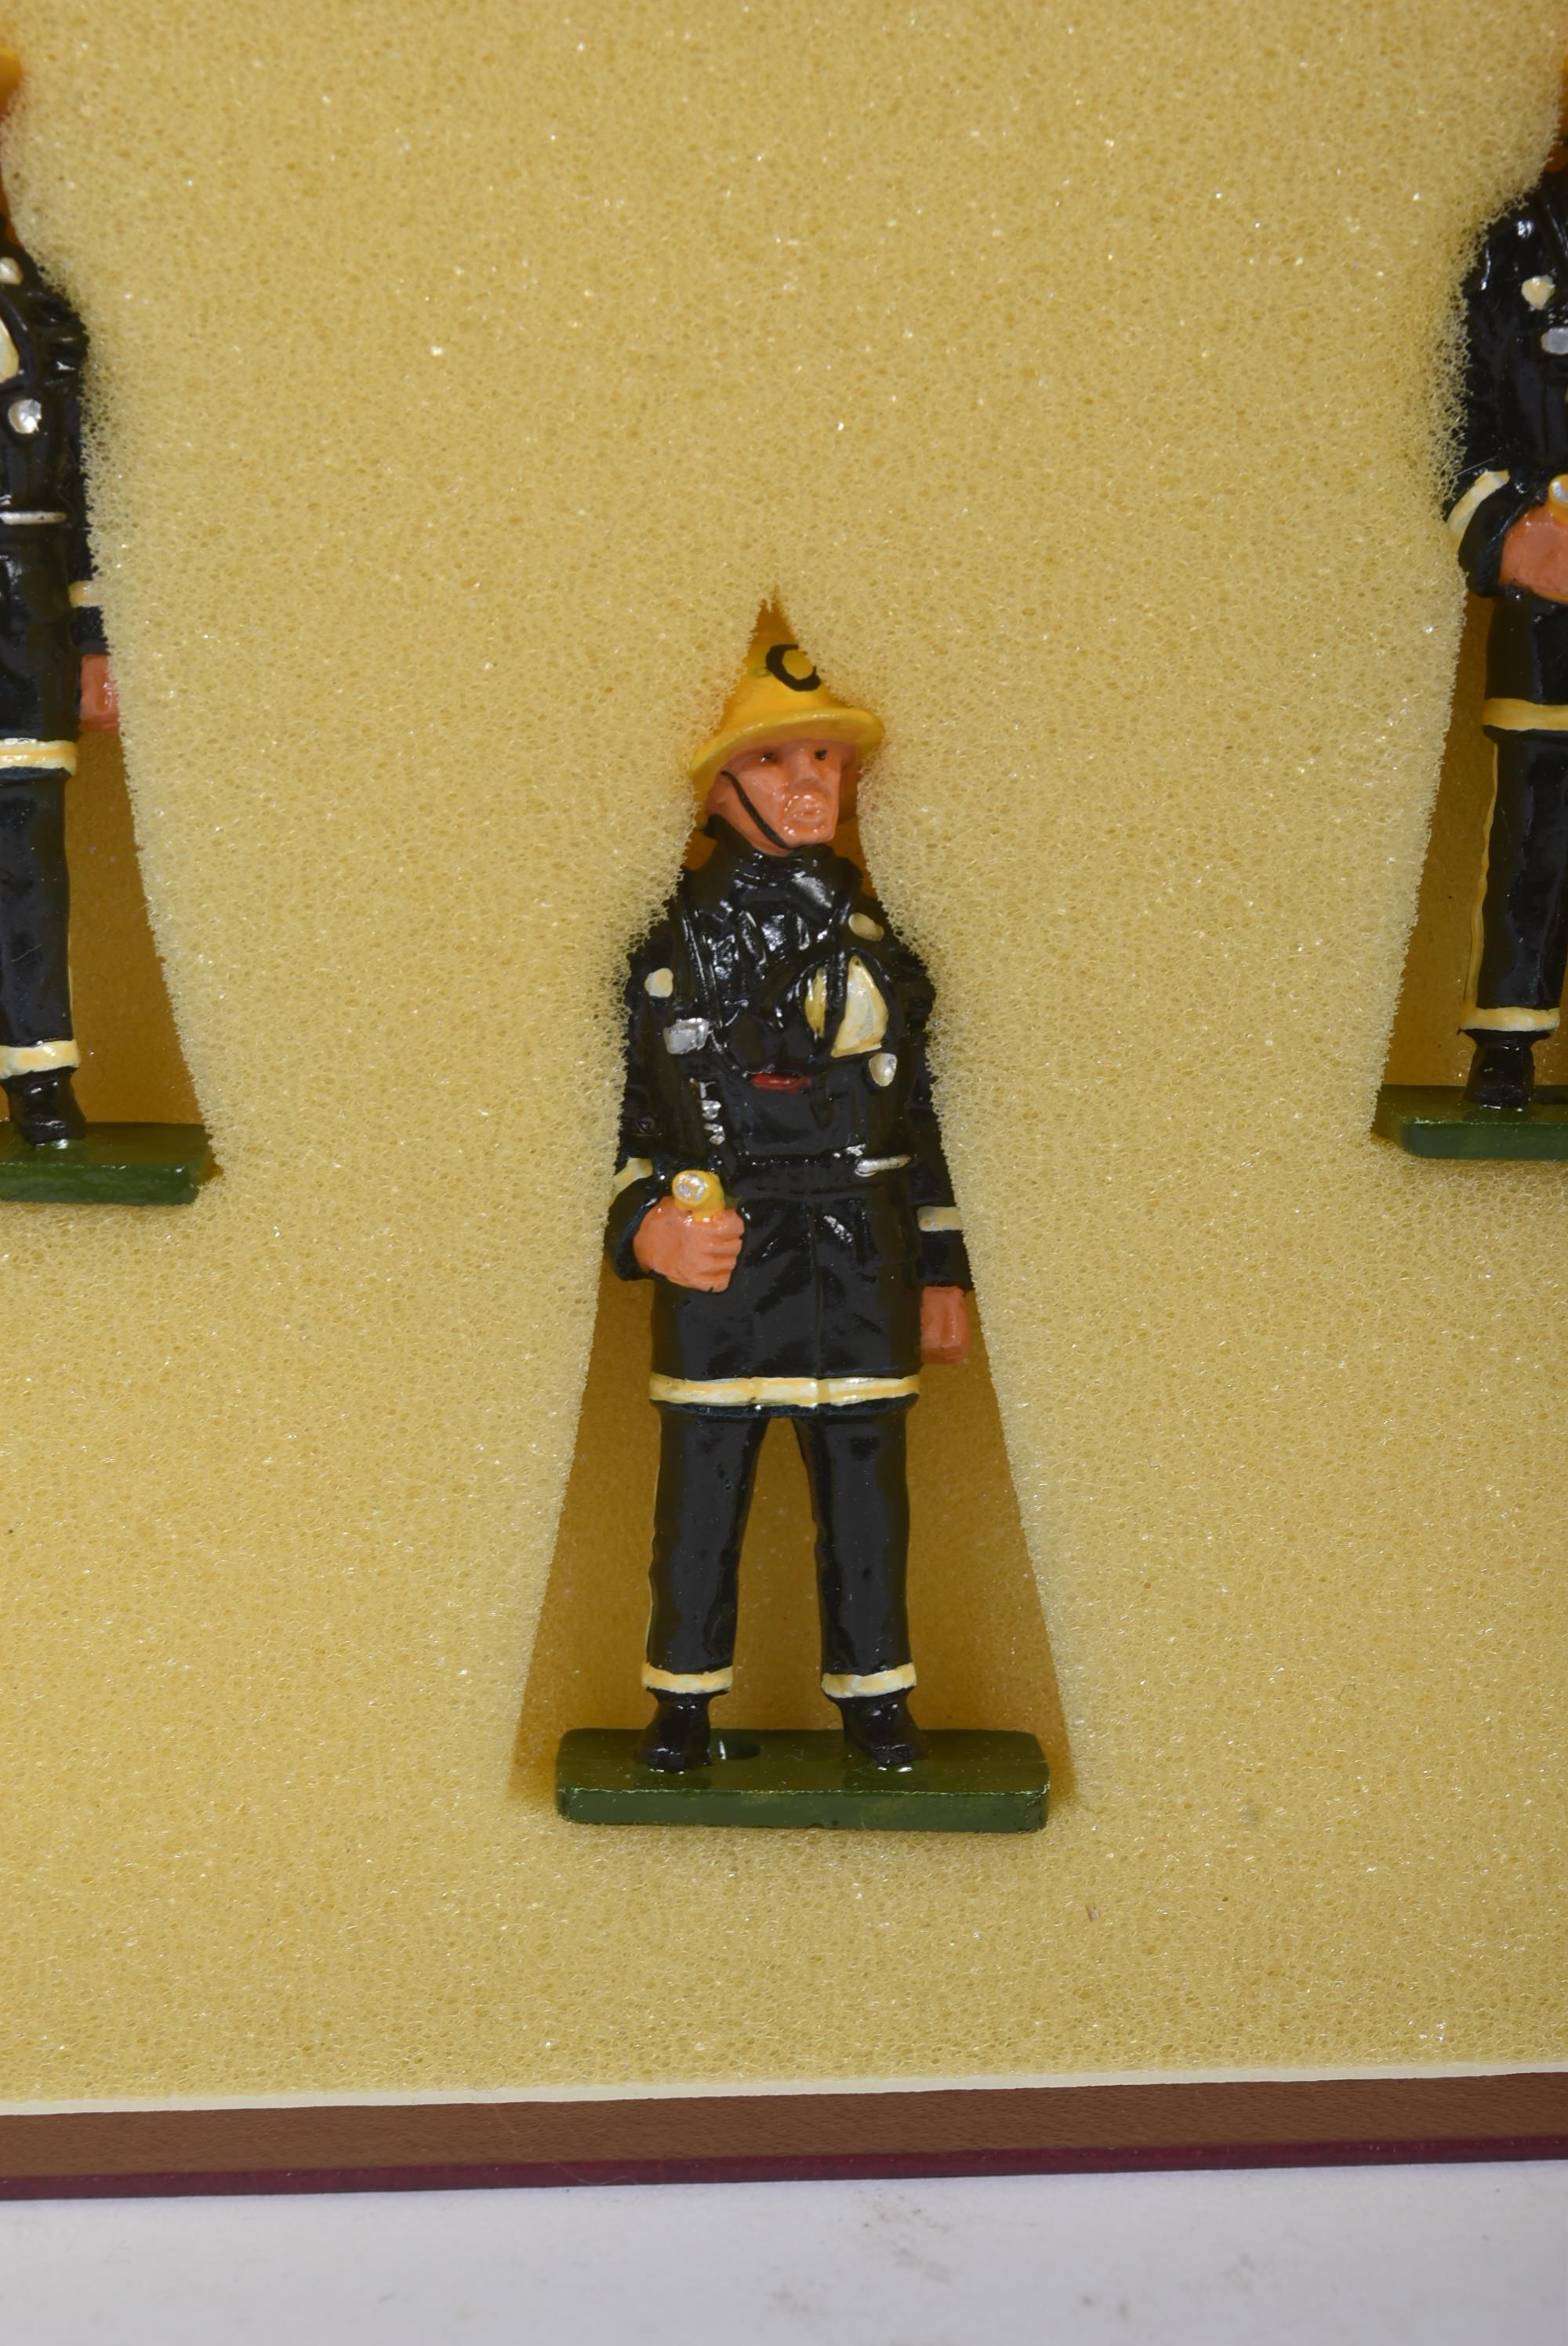 VINTAGE WHITE METAL FIRE FIGHTER MODEL FIGURINES - Image 4 of 5